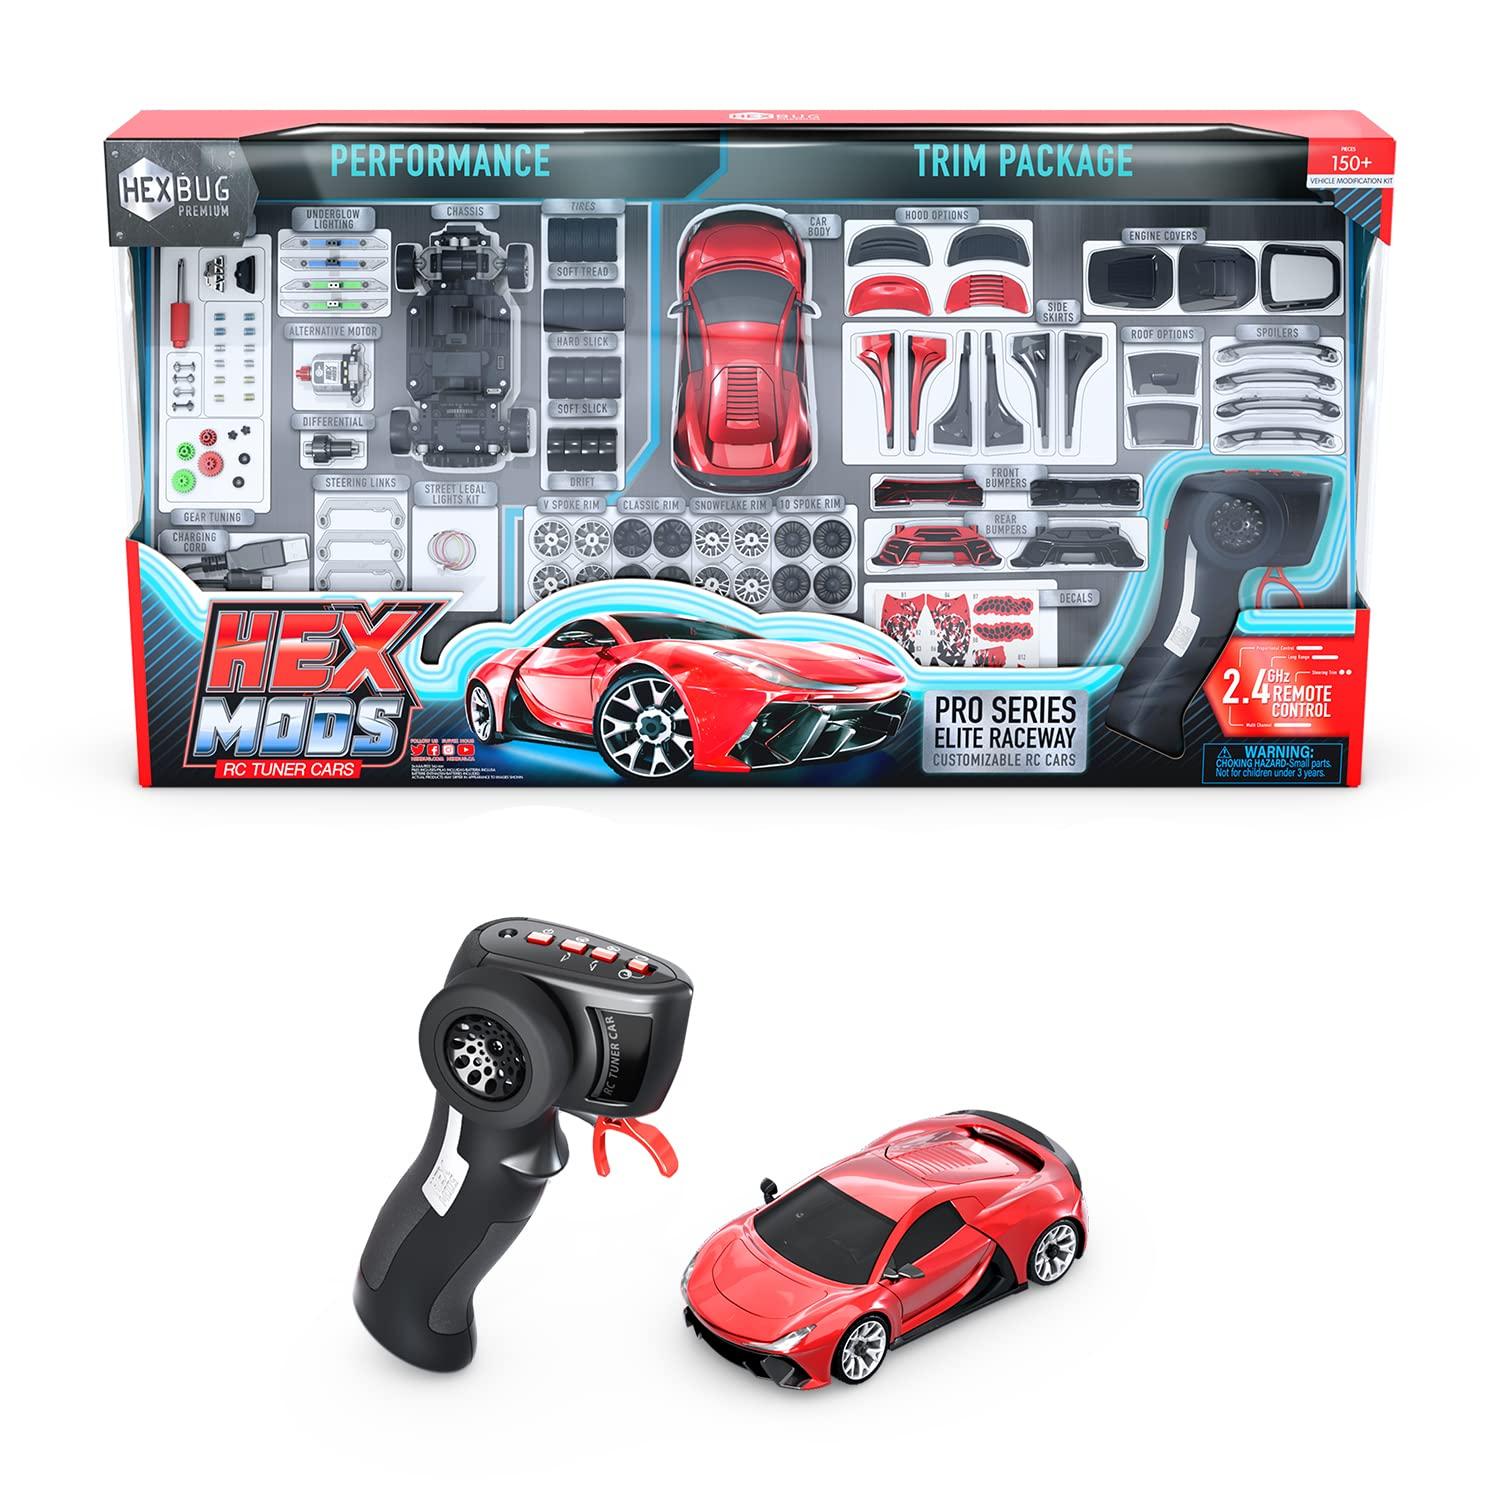 Xmods Micro Rc: XMods Micro RC Cars: High-Performance Fun in a Tiny Package